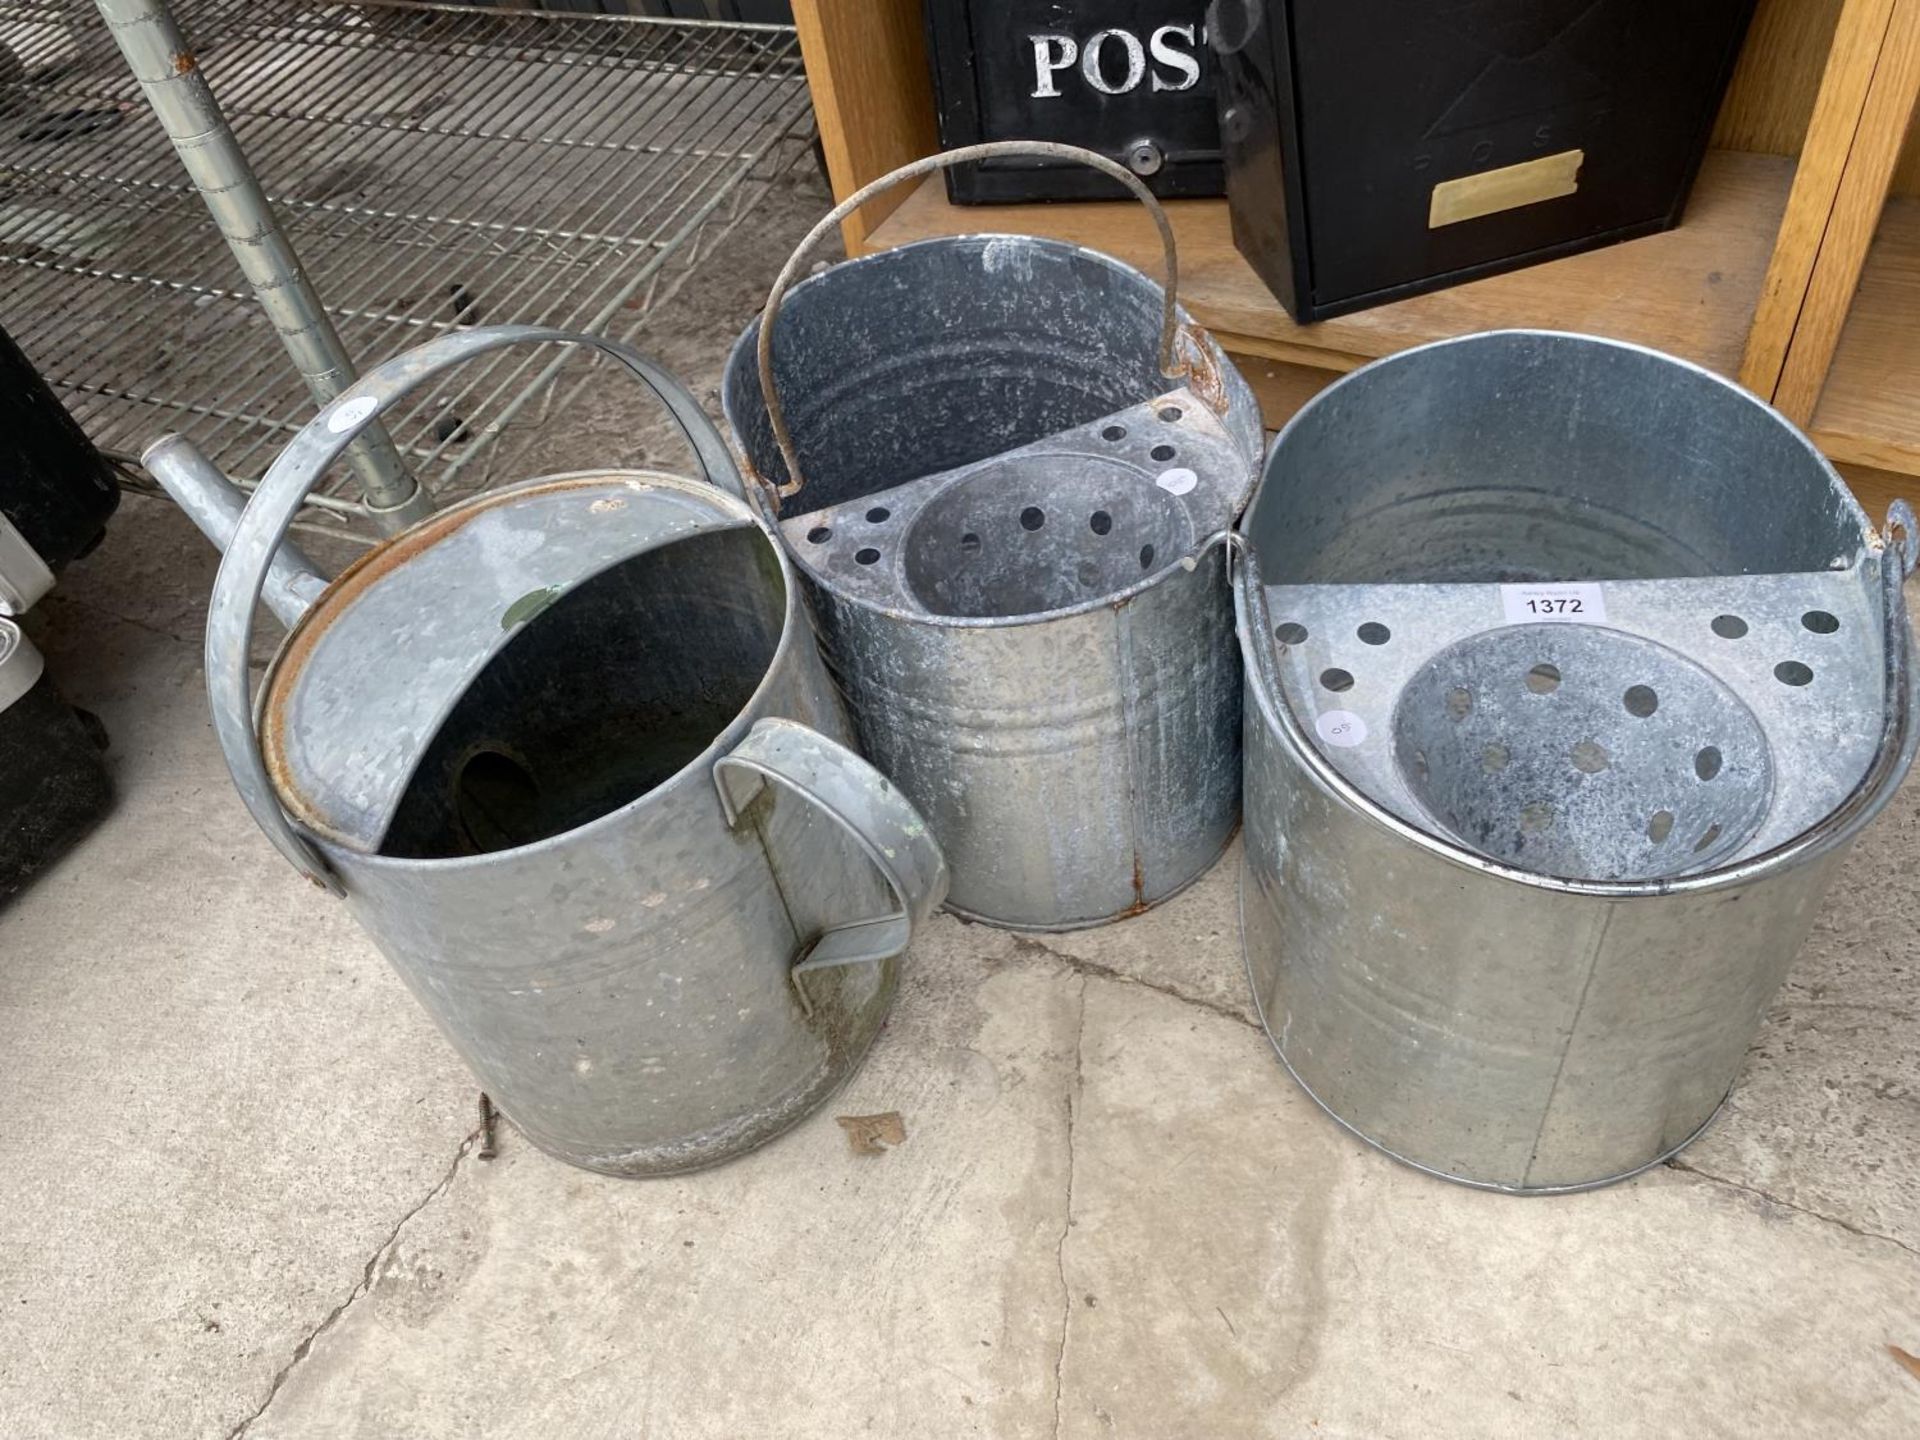 TWO GALVANISED MOP BUCKETS AND A GALVANISED WATERING CAN